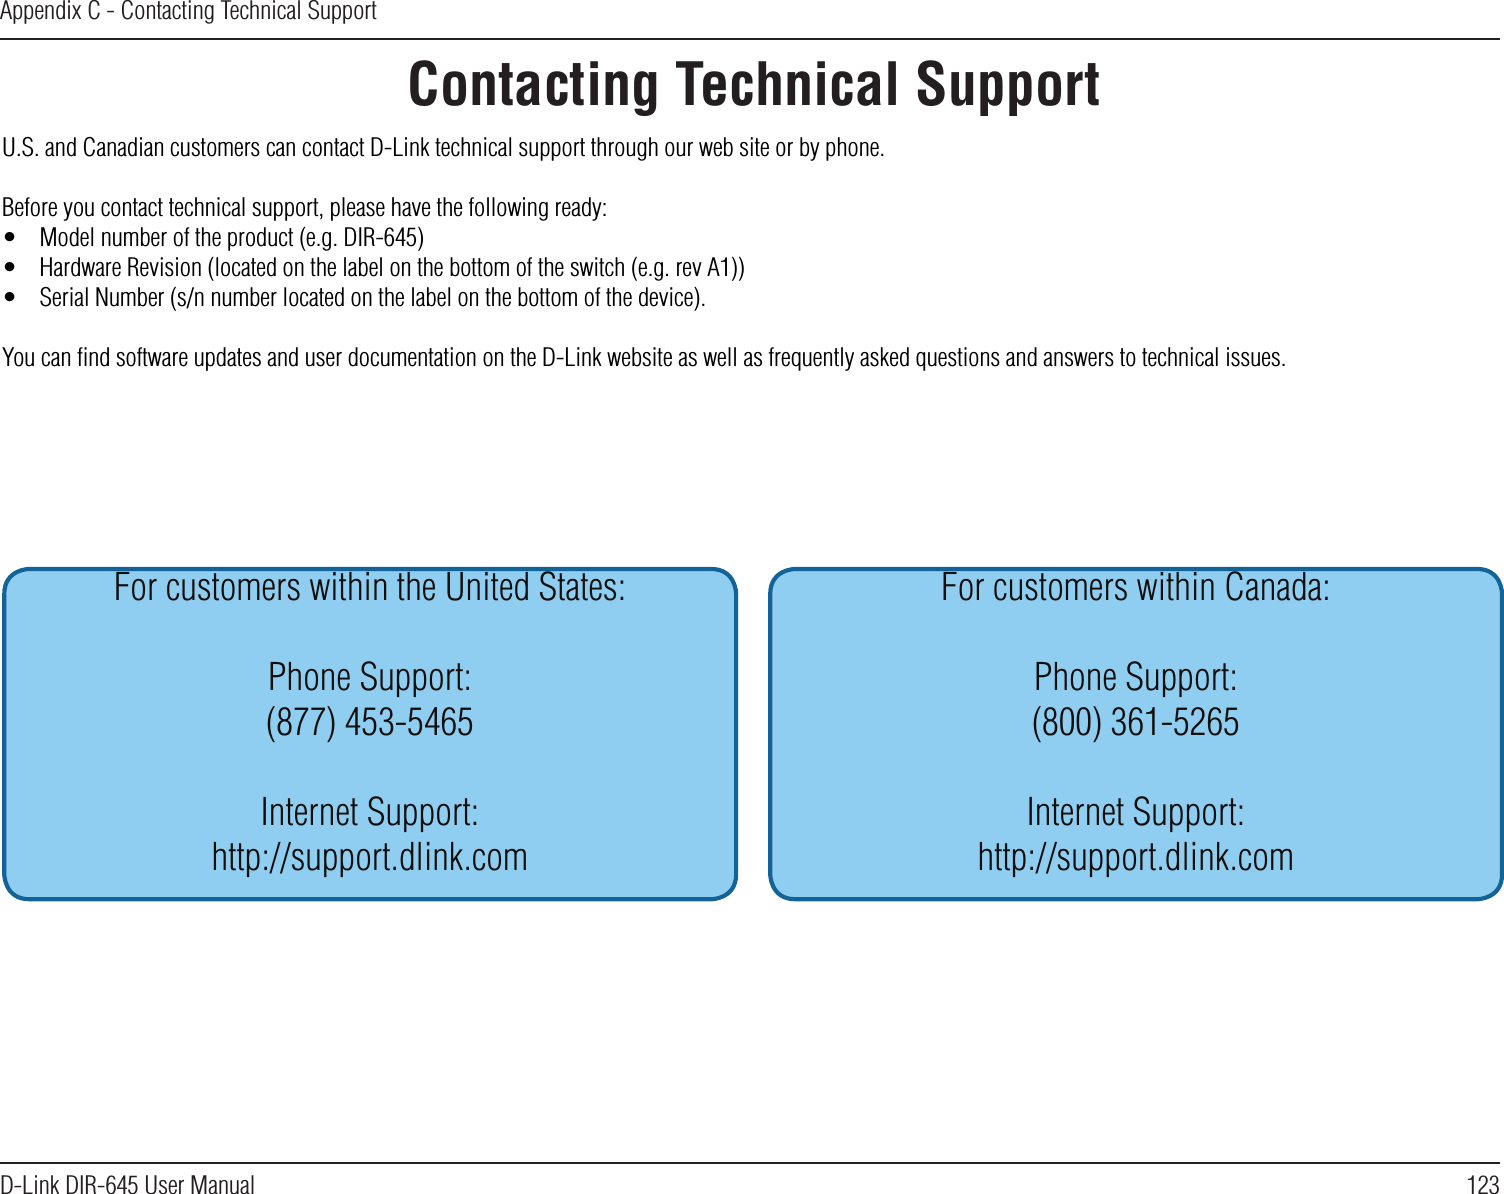 123D-Link DIR-645 User ManualAppendix C - Contacting Technical SupportContacting Technical SupportU.S. and Canadian customers can contact D-Link technical support through our web site or by phone.Before you contact technical support, please have the following ready:•  Model number of the product (e.g. DIR-645)•  Hardware Revision (located on the label on the bottom of the switch (e.g. rev A1))•  Serial Number (s/n number located on the label on the bottom of the device).You can ﬁnd software updates and user documentation on the D-Link website as well as frequently asked questions and answers to technical issues.For customers within the United States:Phone Support:(877) 453-5465Internet Support:http://support.dlink.comFor customers within Canada:Phone Support:(800) 361-5265Internet Support:http://support.dlink.com